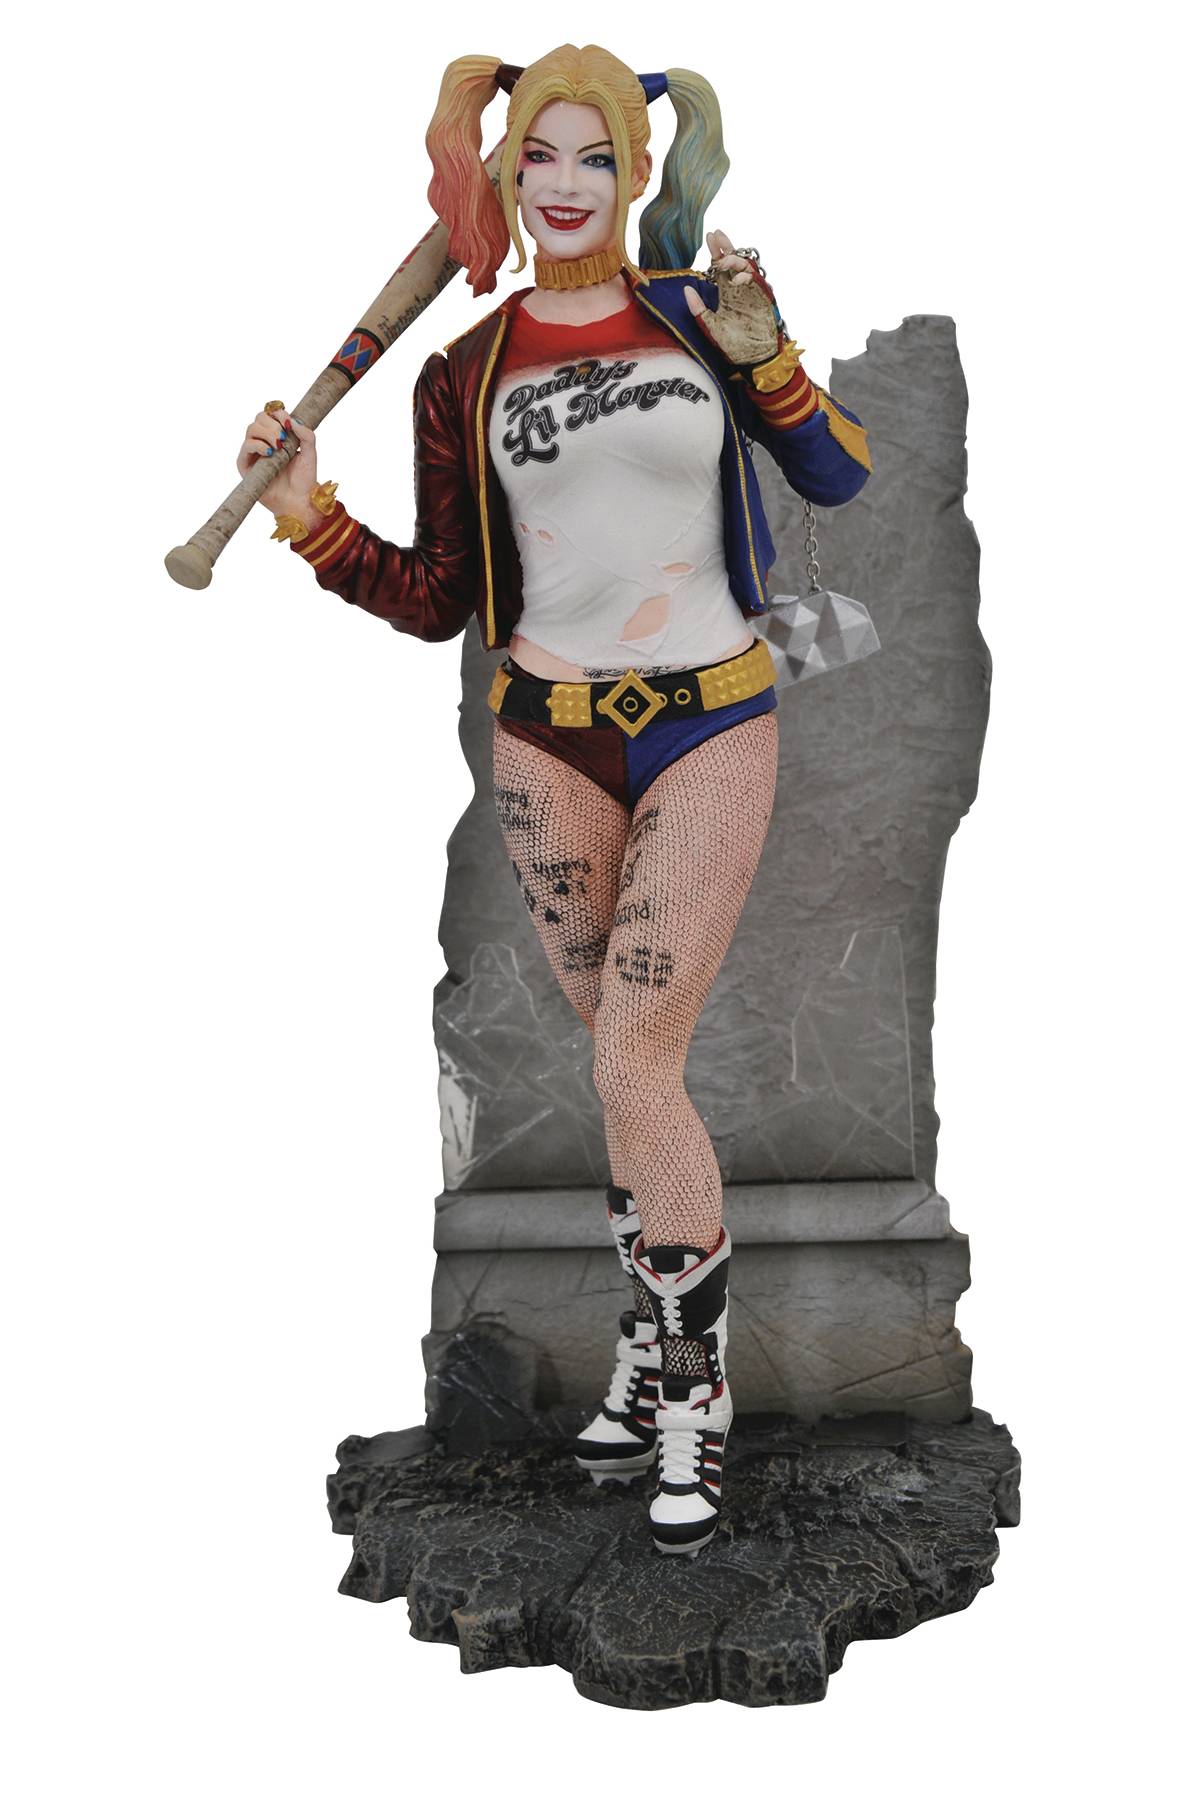 DC GALLERY SUICIDE SQUAD MOVIE HARLEY QUINN PVC FIGURE